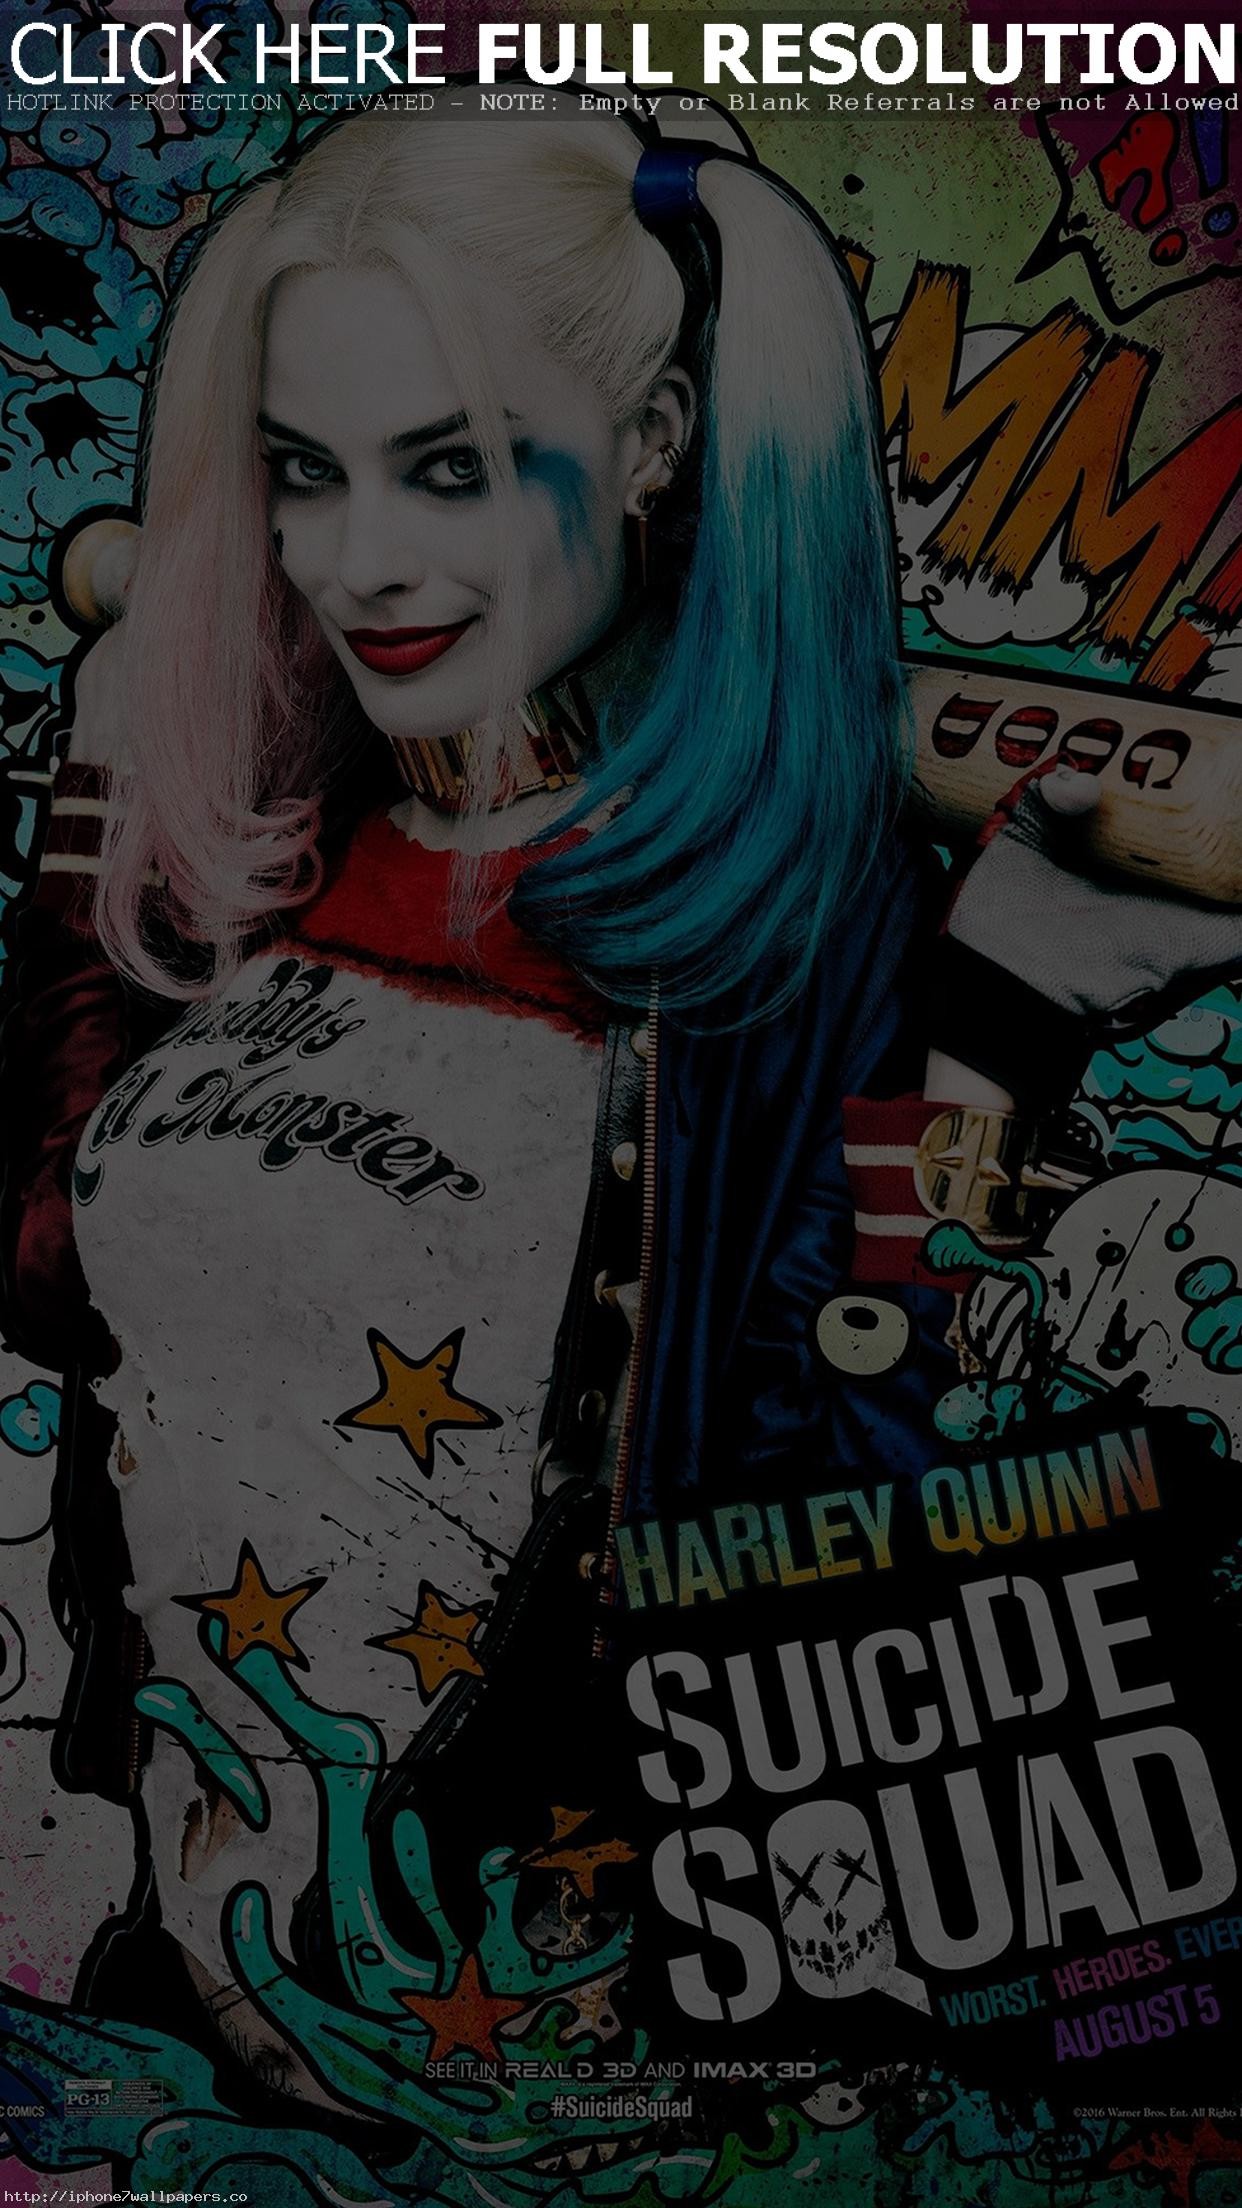 1242x2208 Suicide Squad Film Poster Art Illustration Joker Haley Quinn Android  wallpaper - Android HD wallpapers